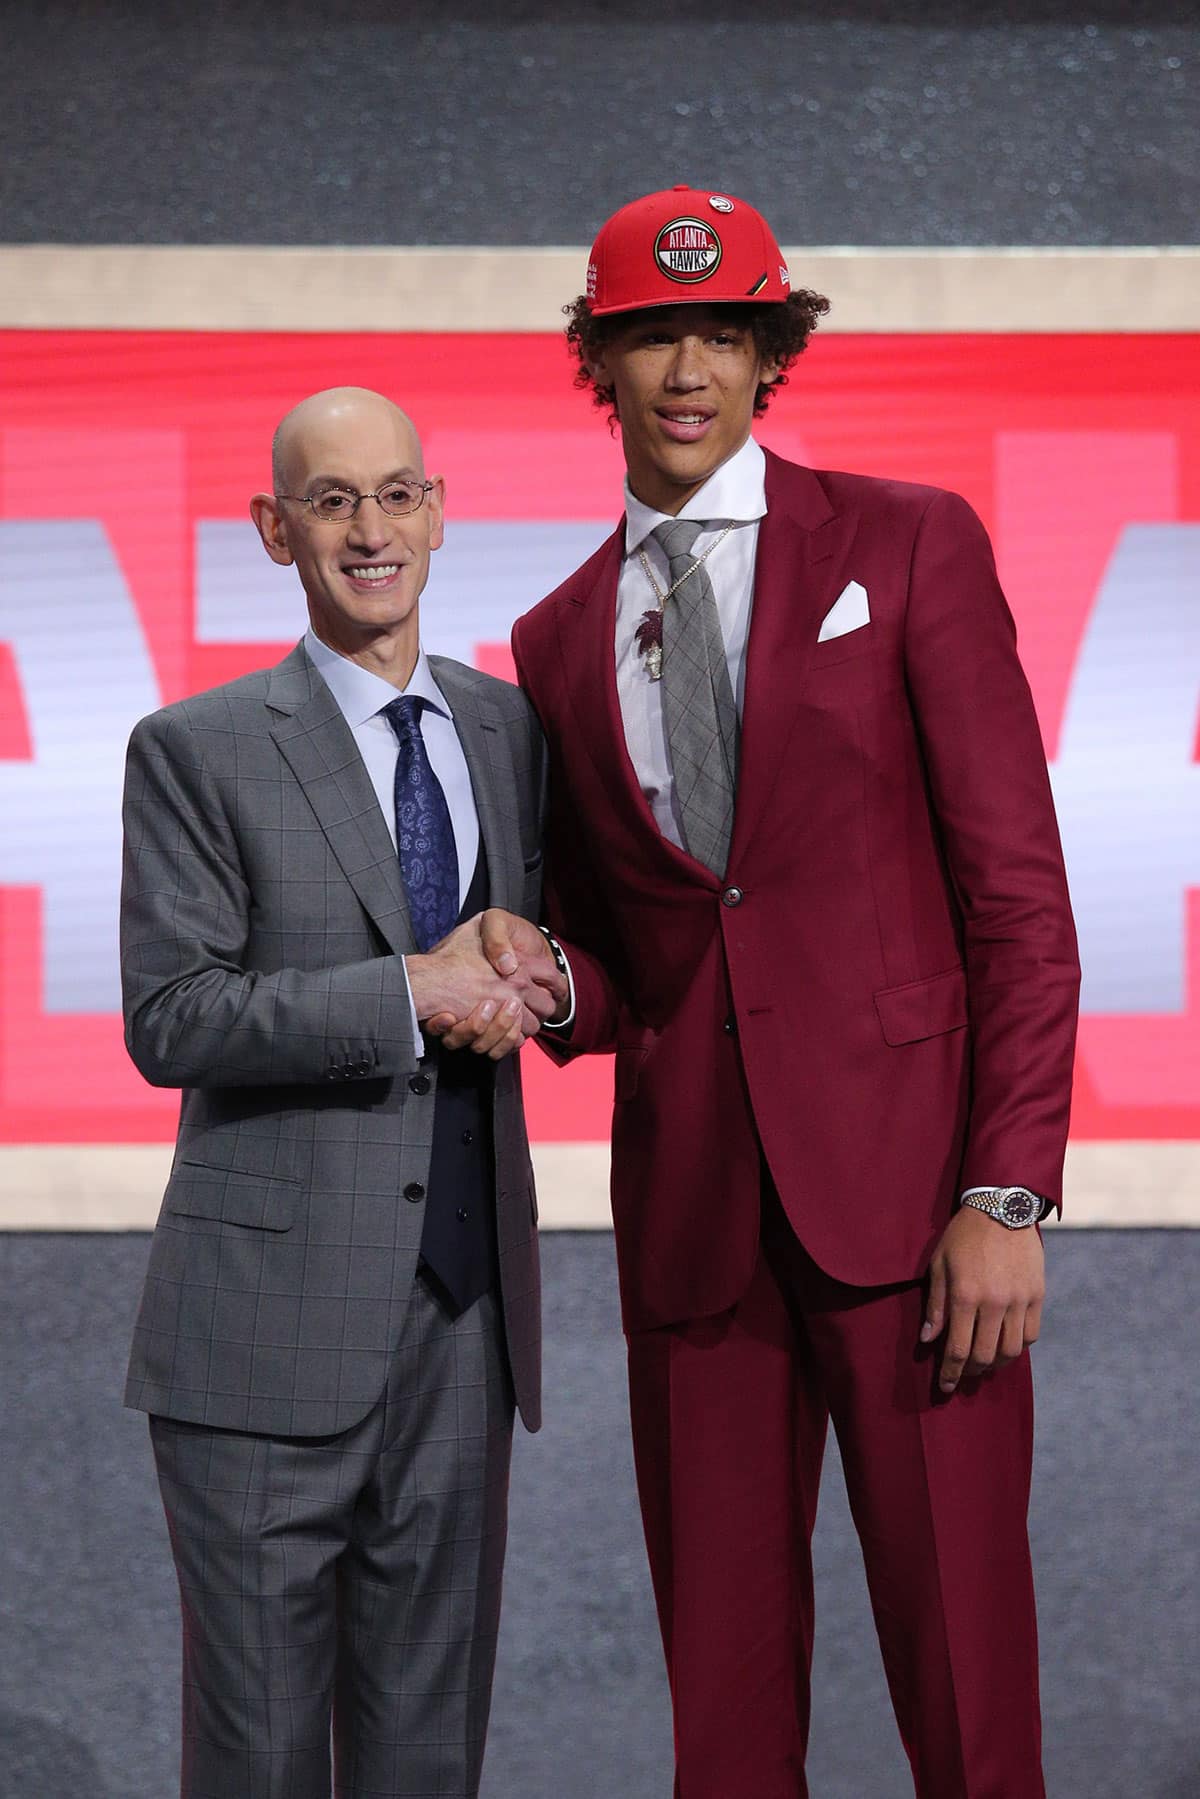 Jaxson Hayes (Texas) greets NBA commissioner Adam Silver after being selected as the number eighth overall pick to the Atlanta Hawks